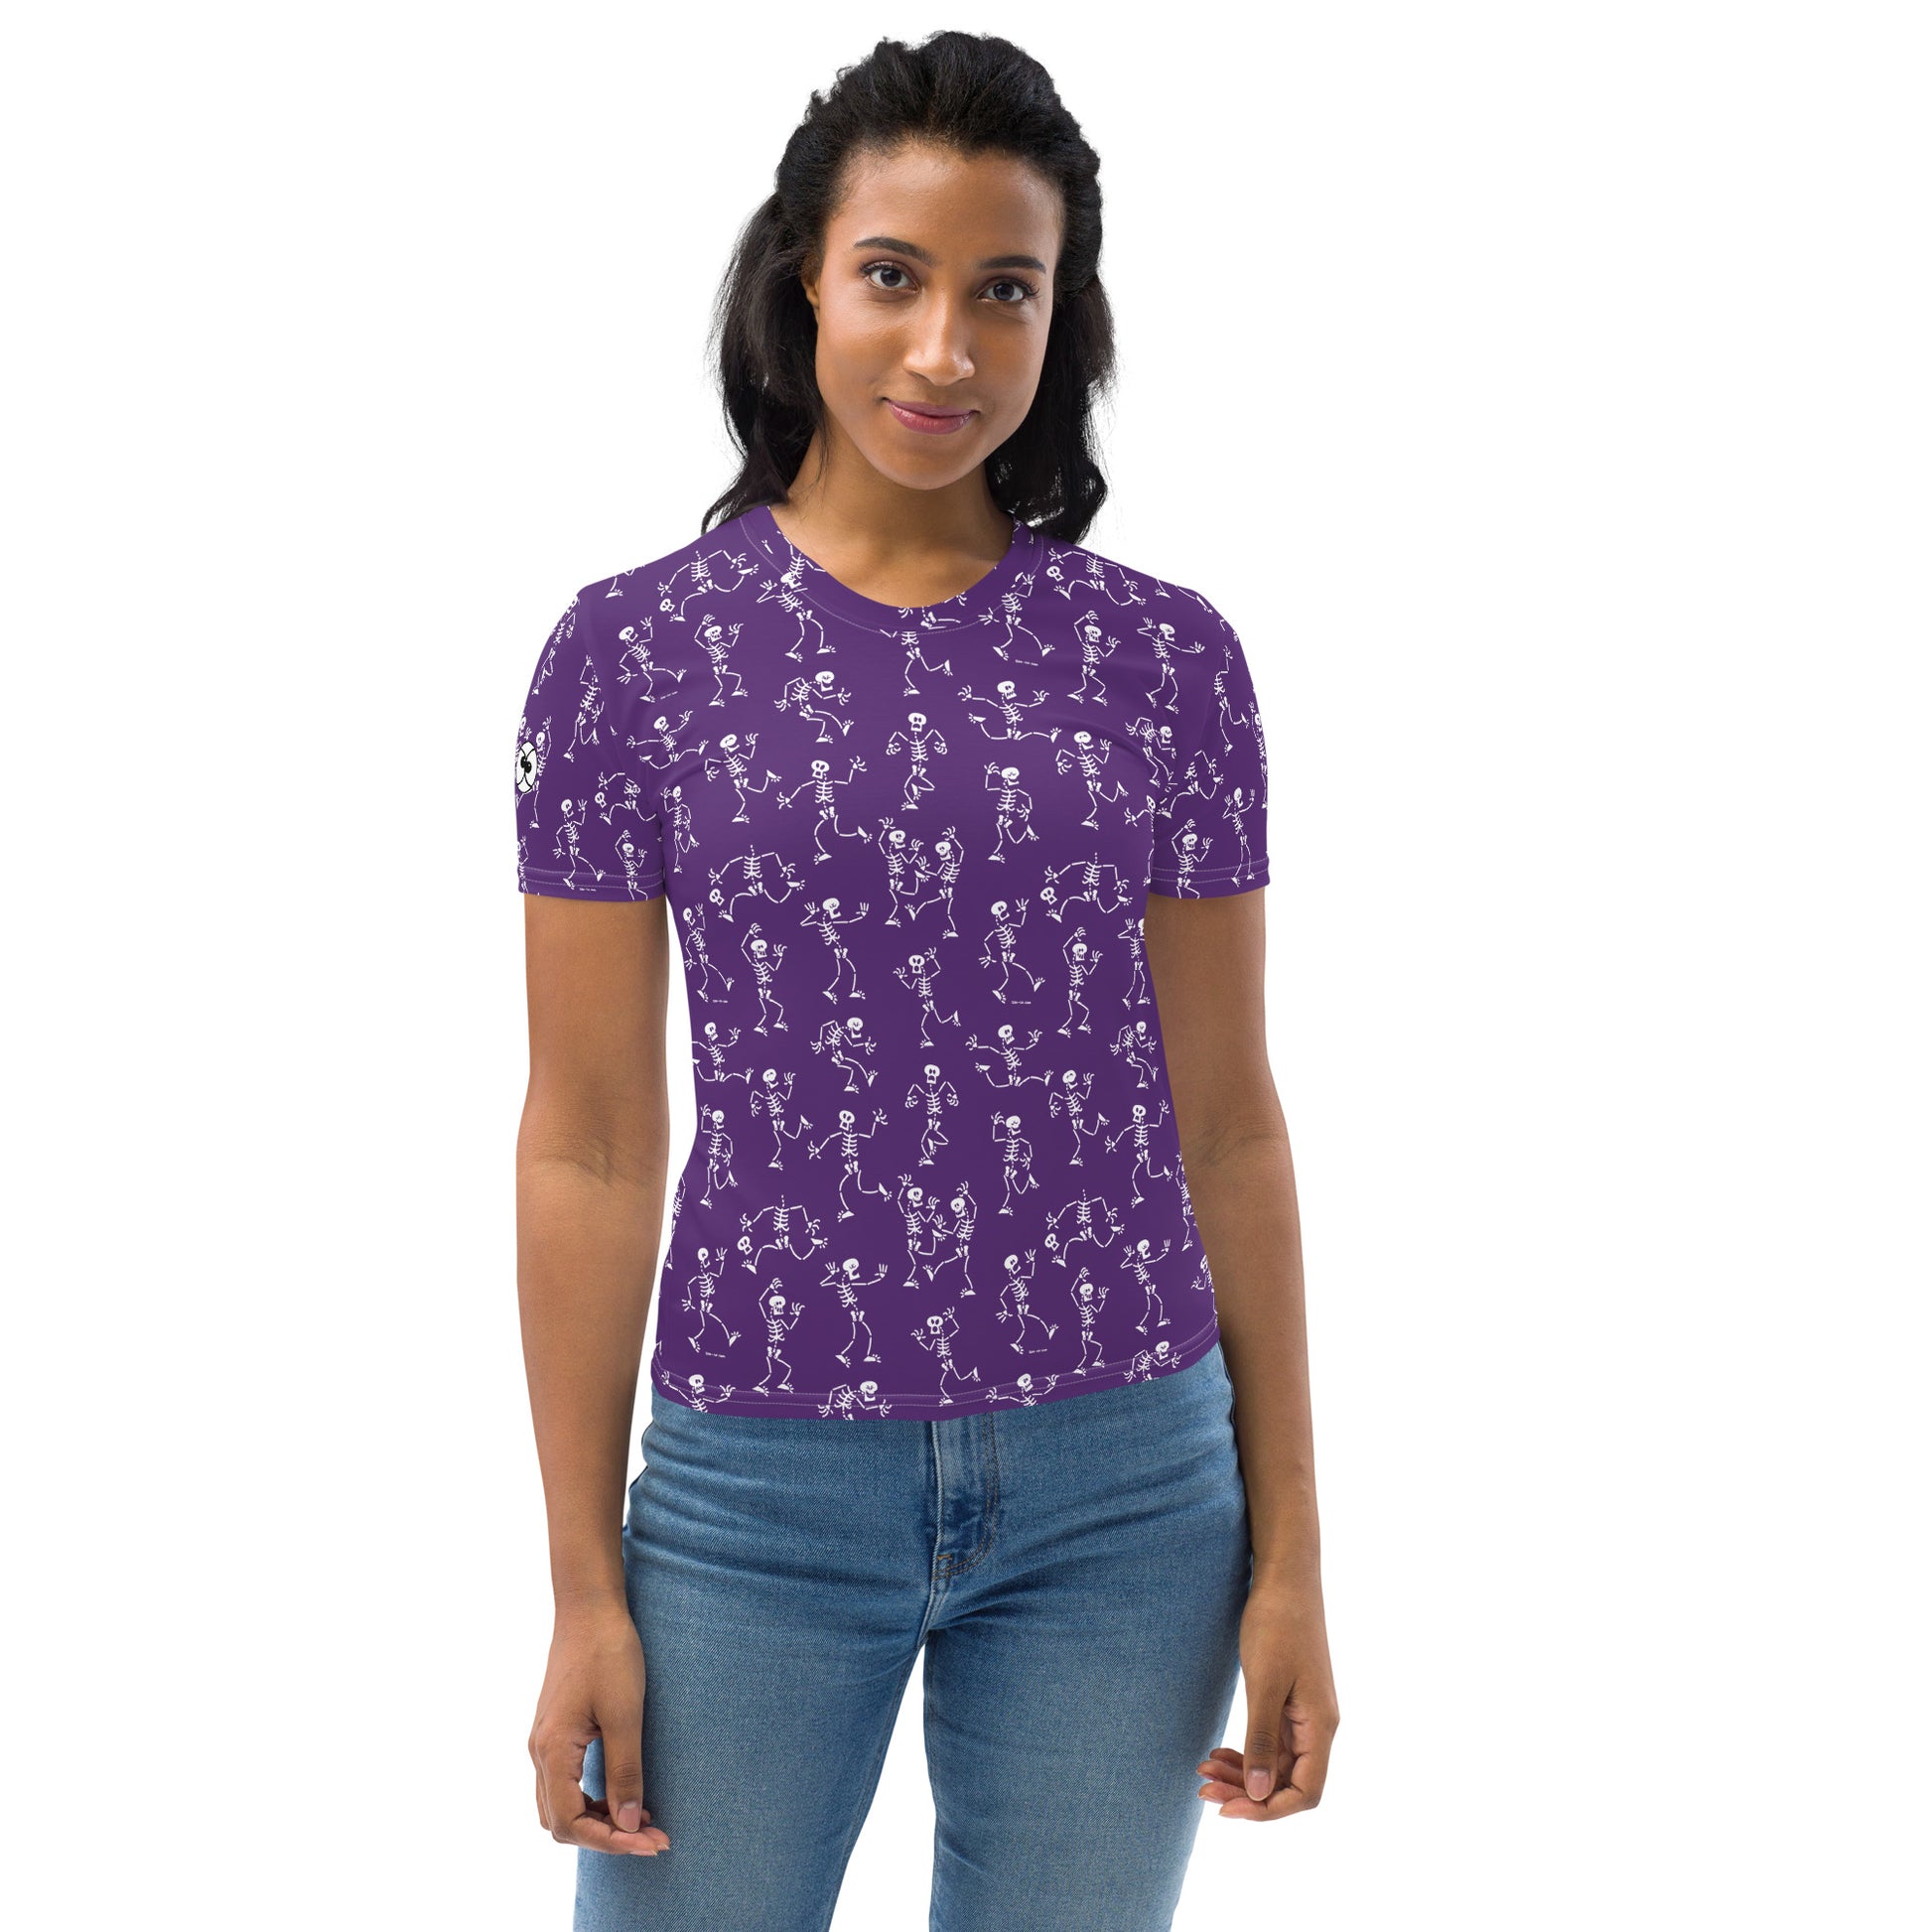 Fantastic skeletons having a great time at Halloween Women's T-shirt. Front view